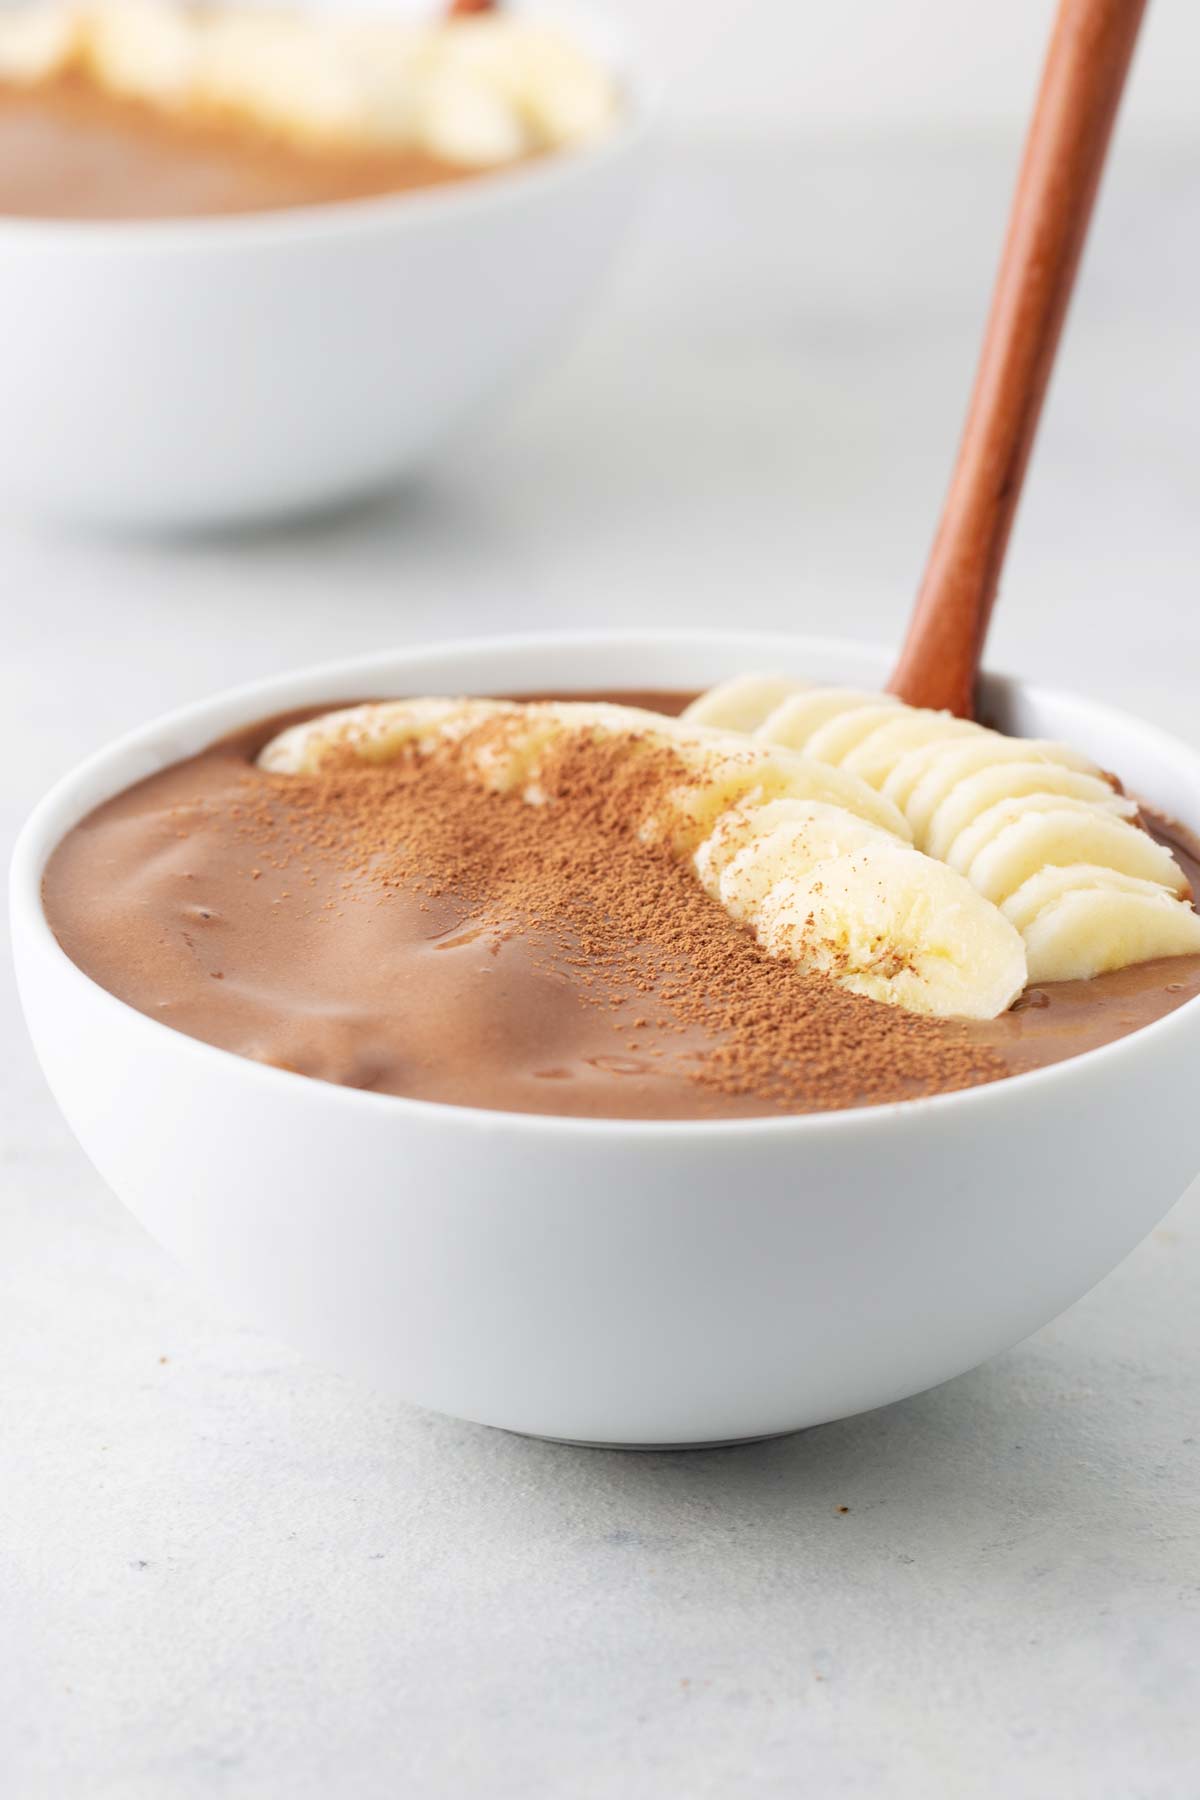 Chocolate smoothie bowl on a table.